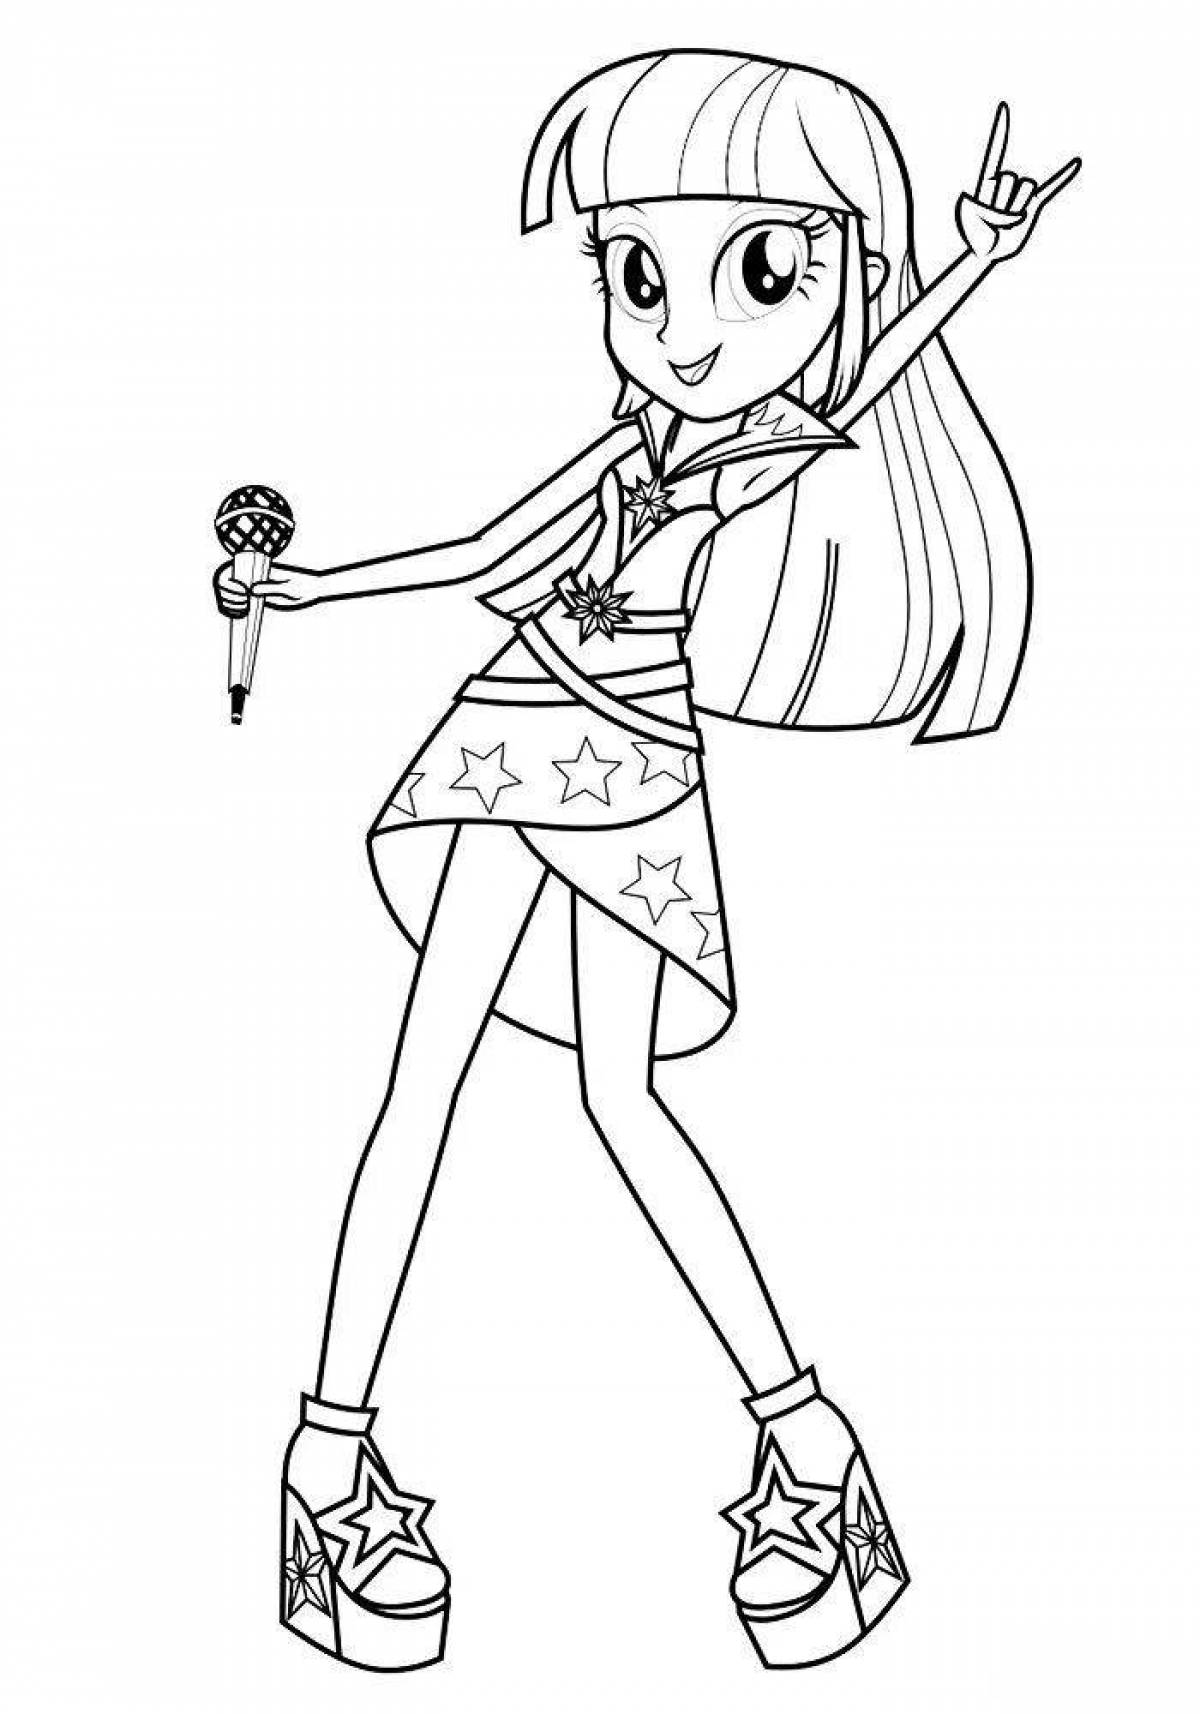 Amazing twilight sparkle coloring page